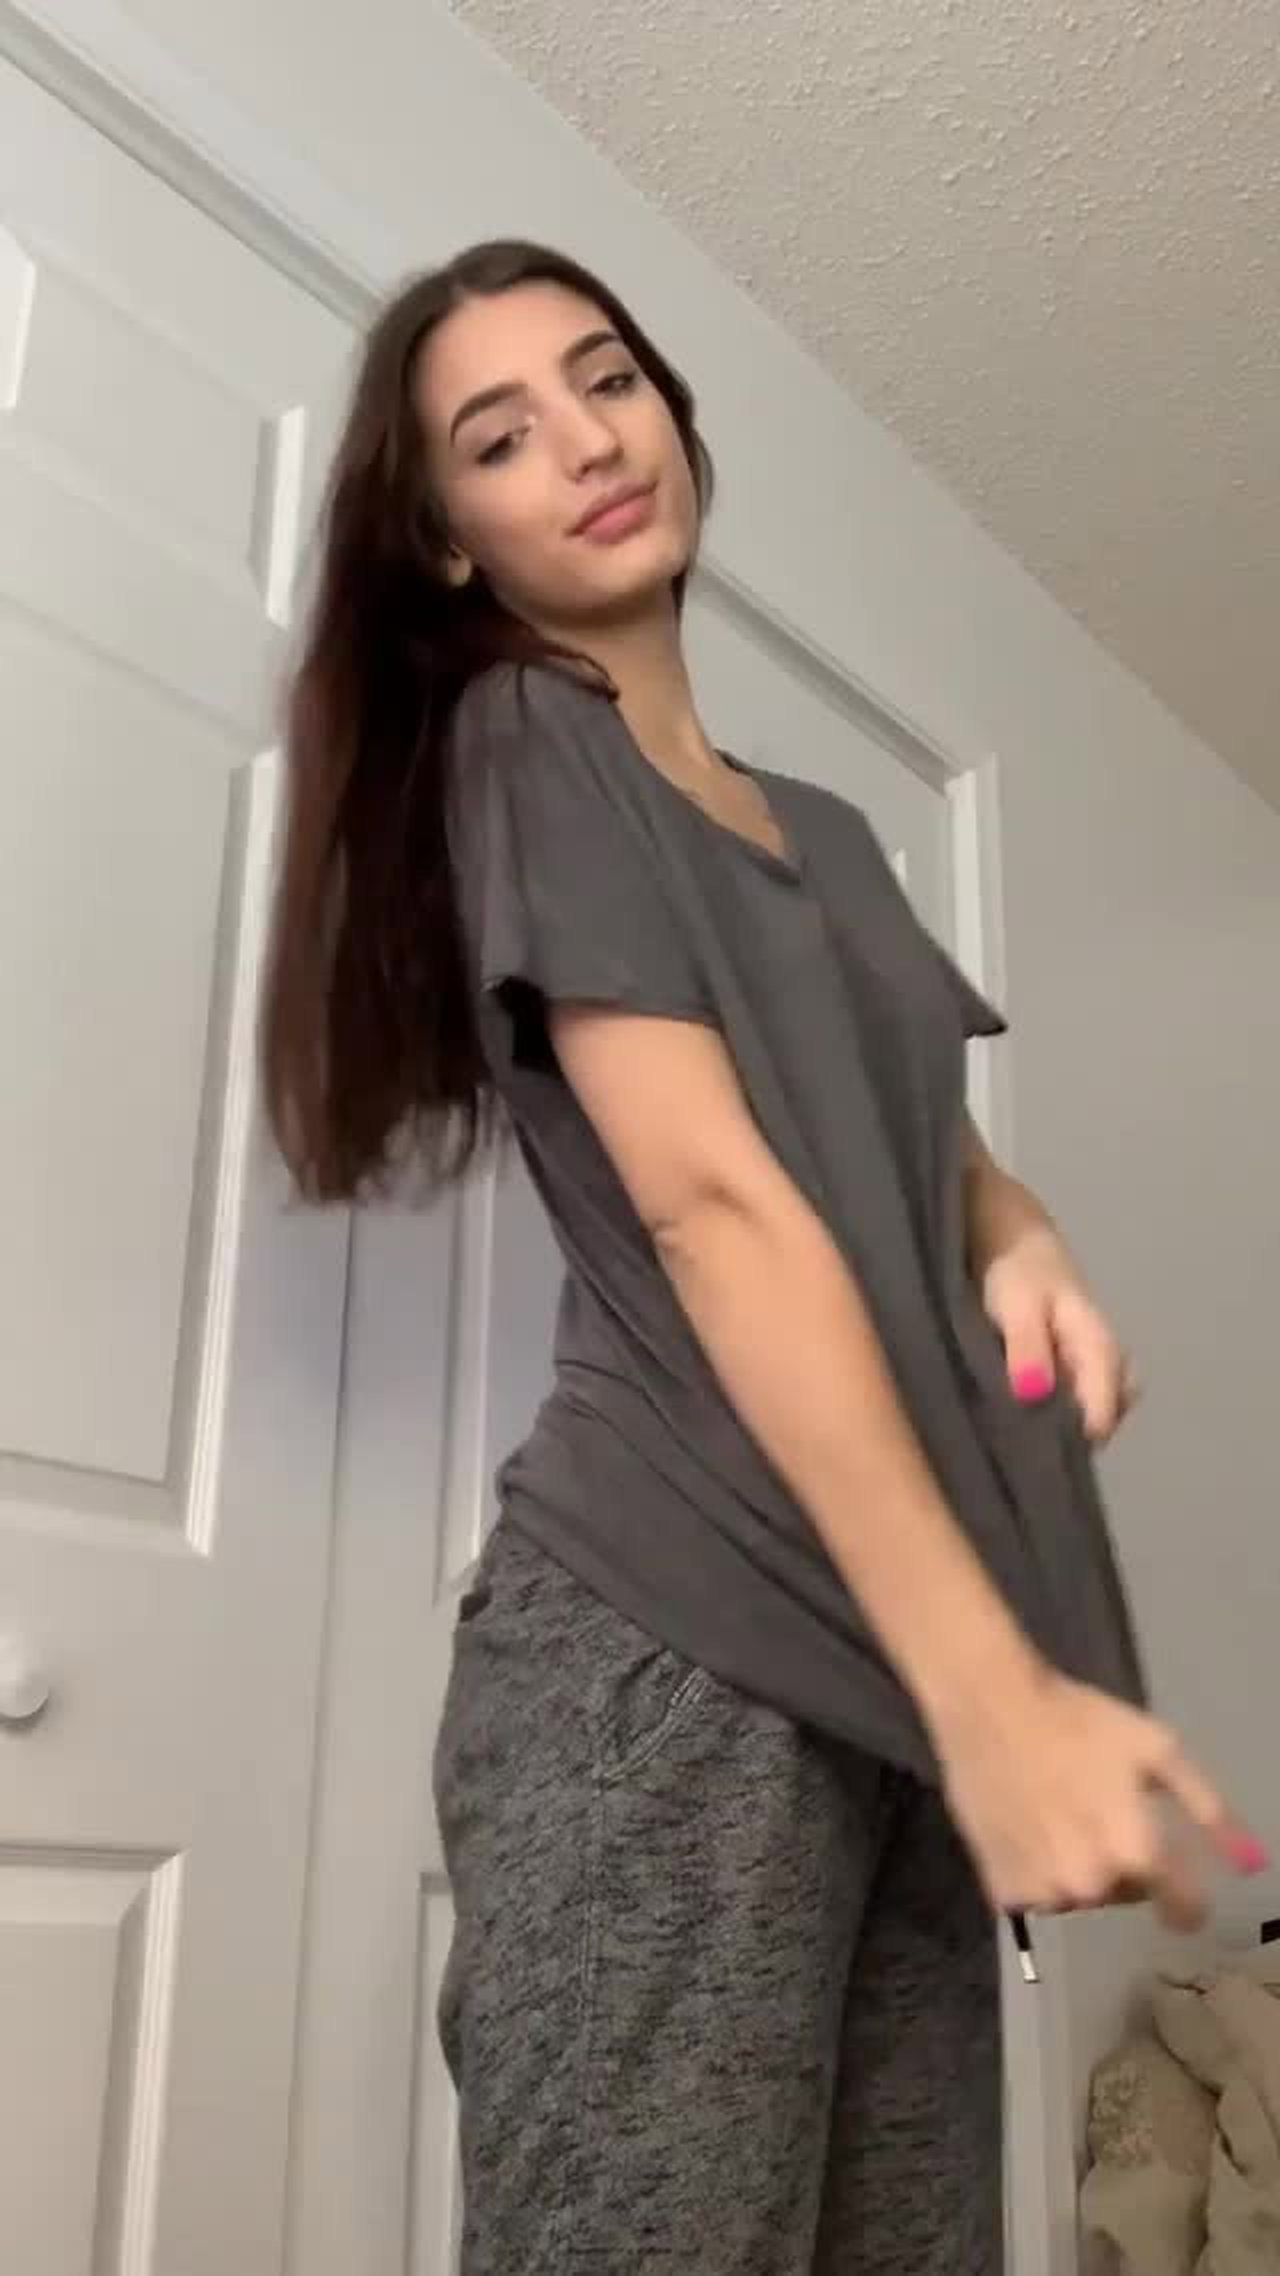 Video post by Luststories69